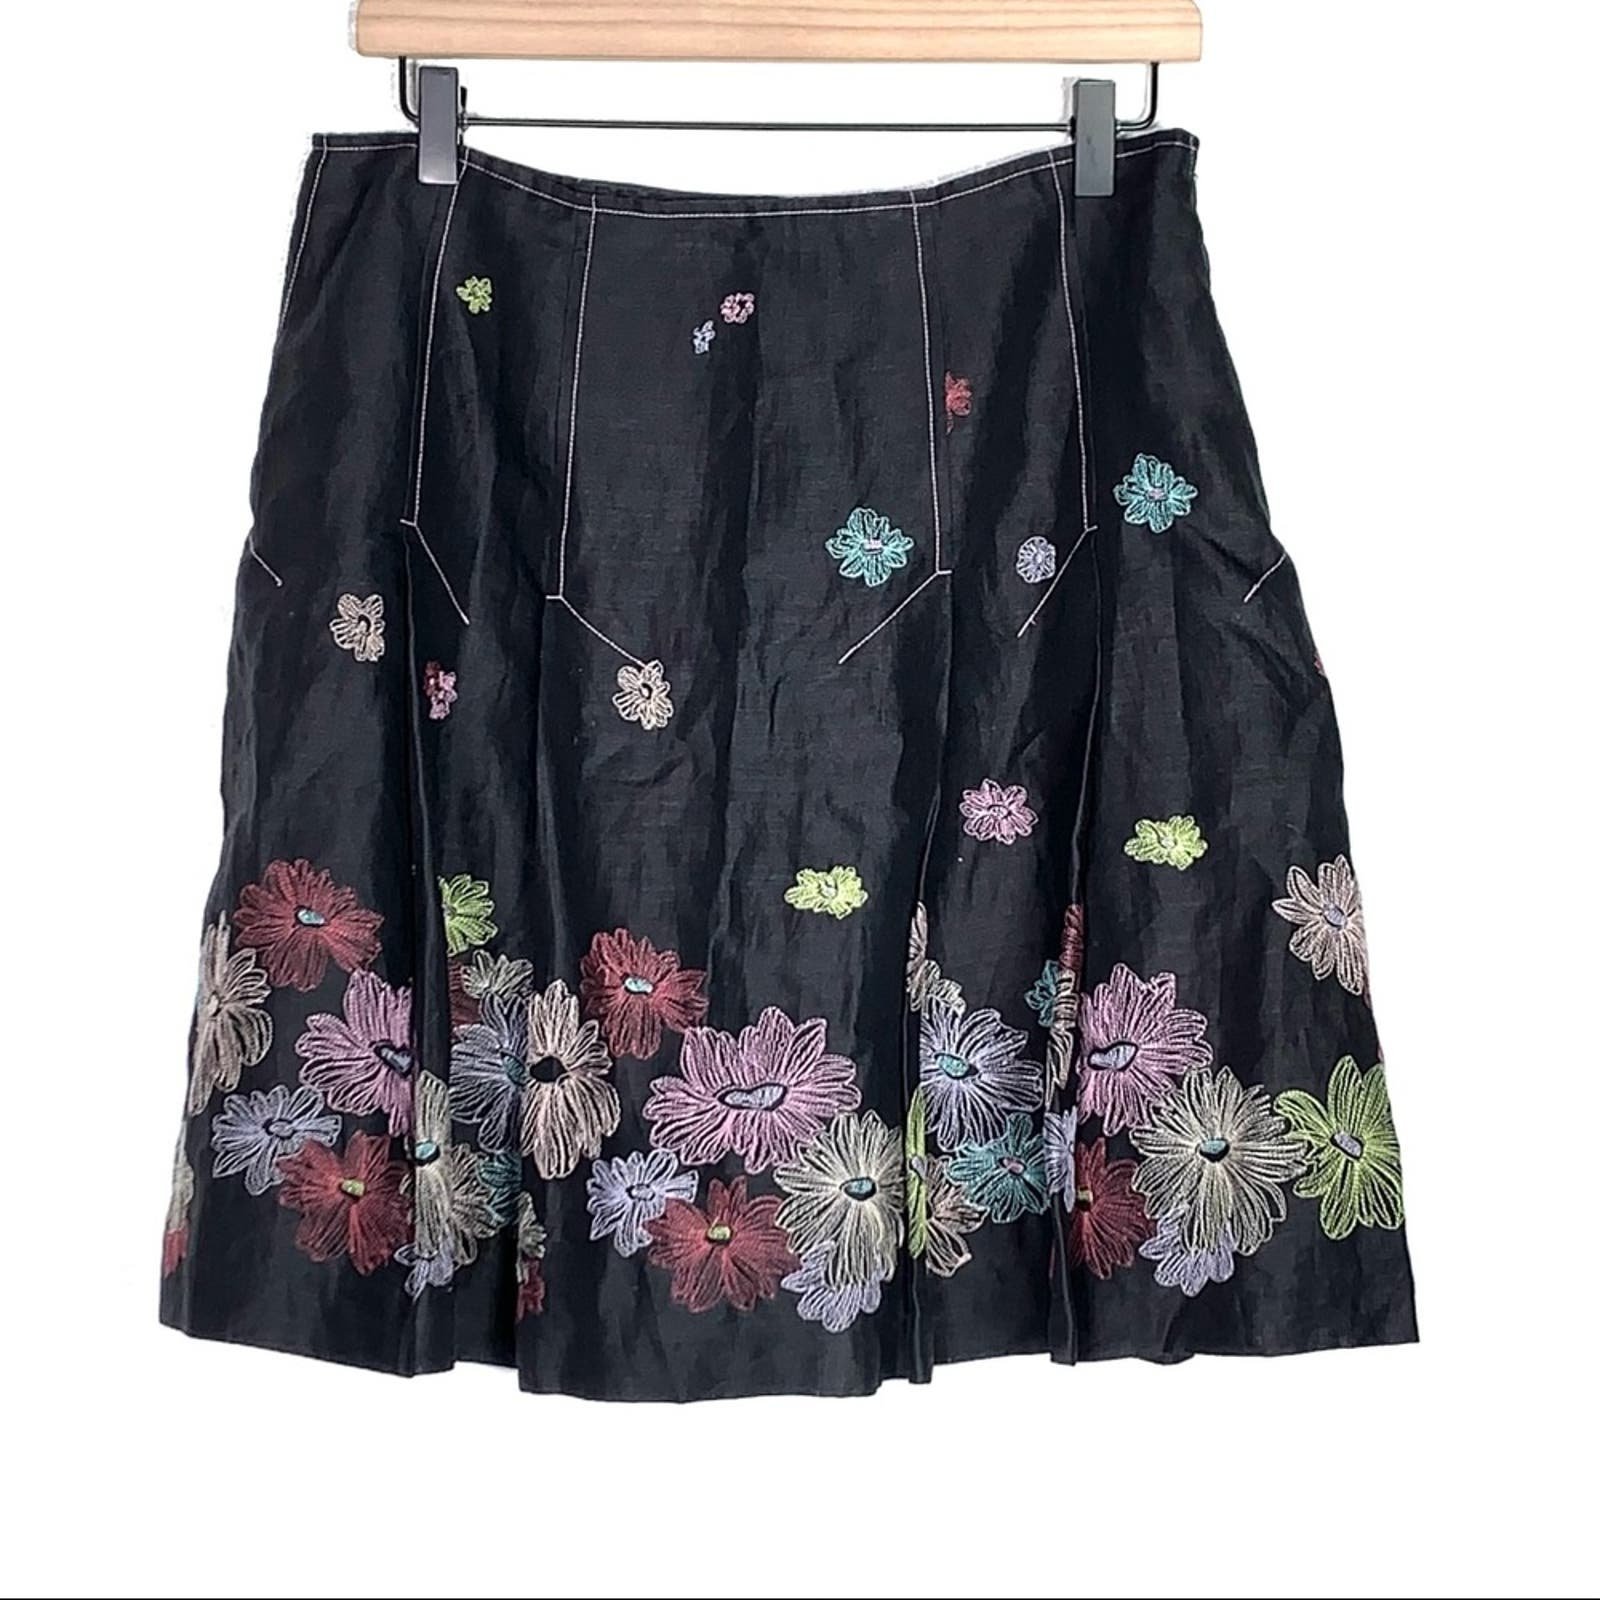 Promotions  Silkland 100% linen floral crocheted pleated a line knee length skirt size 10 PAsgbnZWb outlet online shop